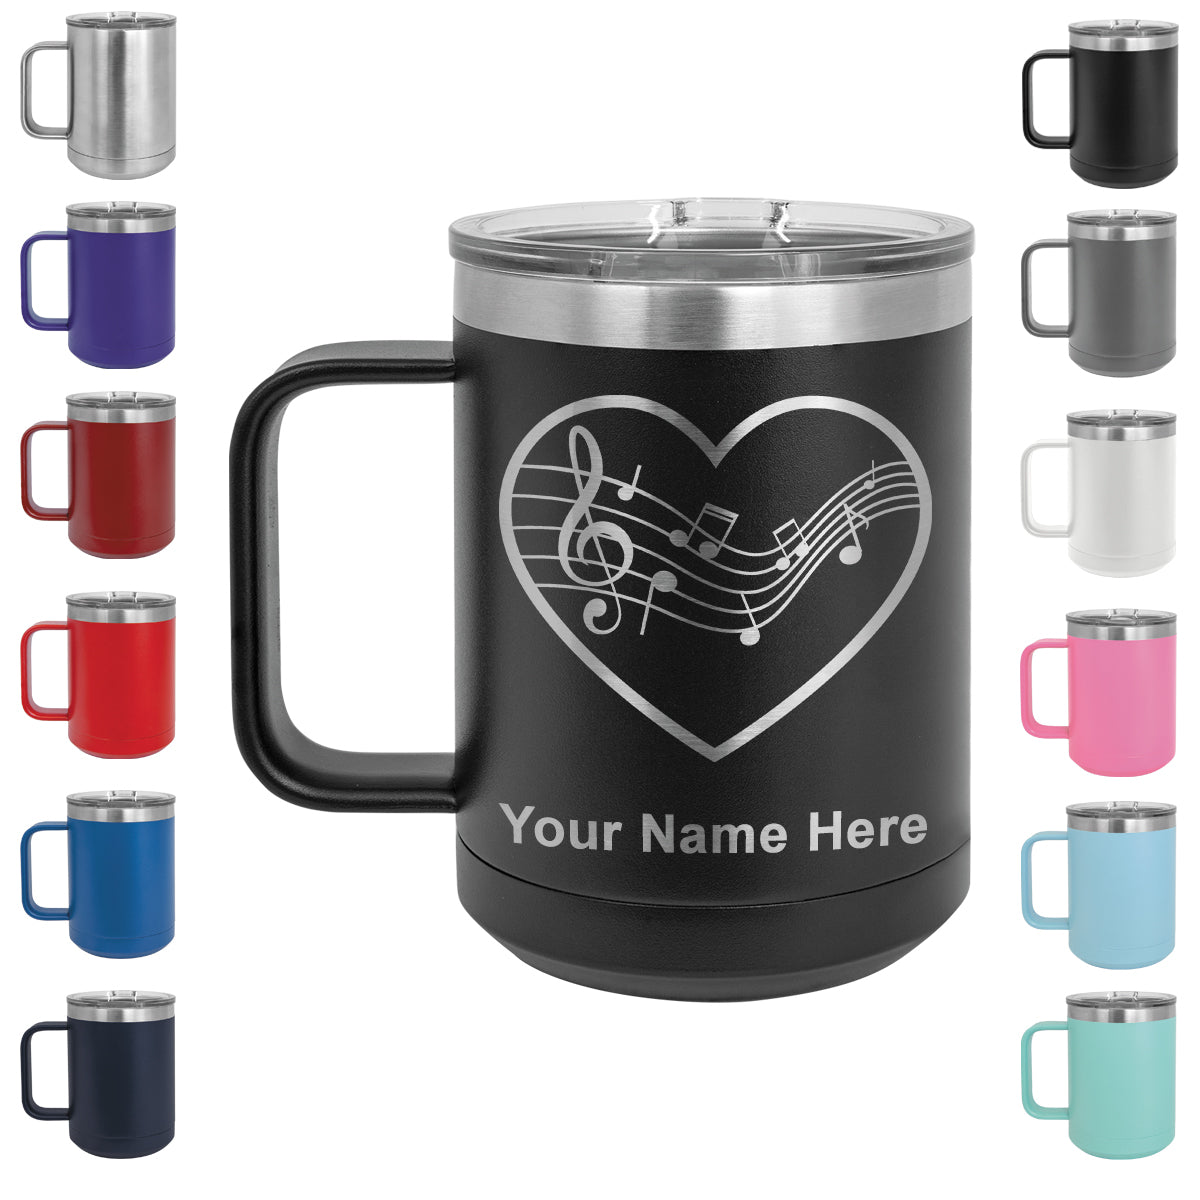 15oz Vacuum Insulated Coffee Mug, Music Staff Heart, Personalized Engraving Included